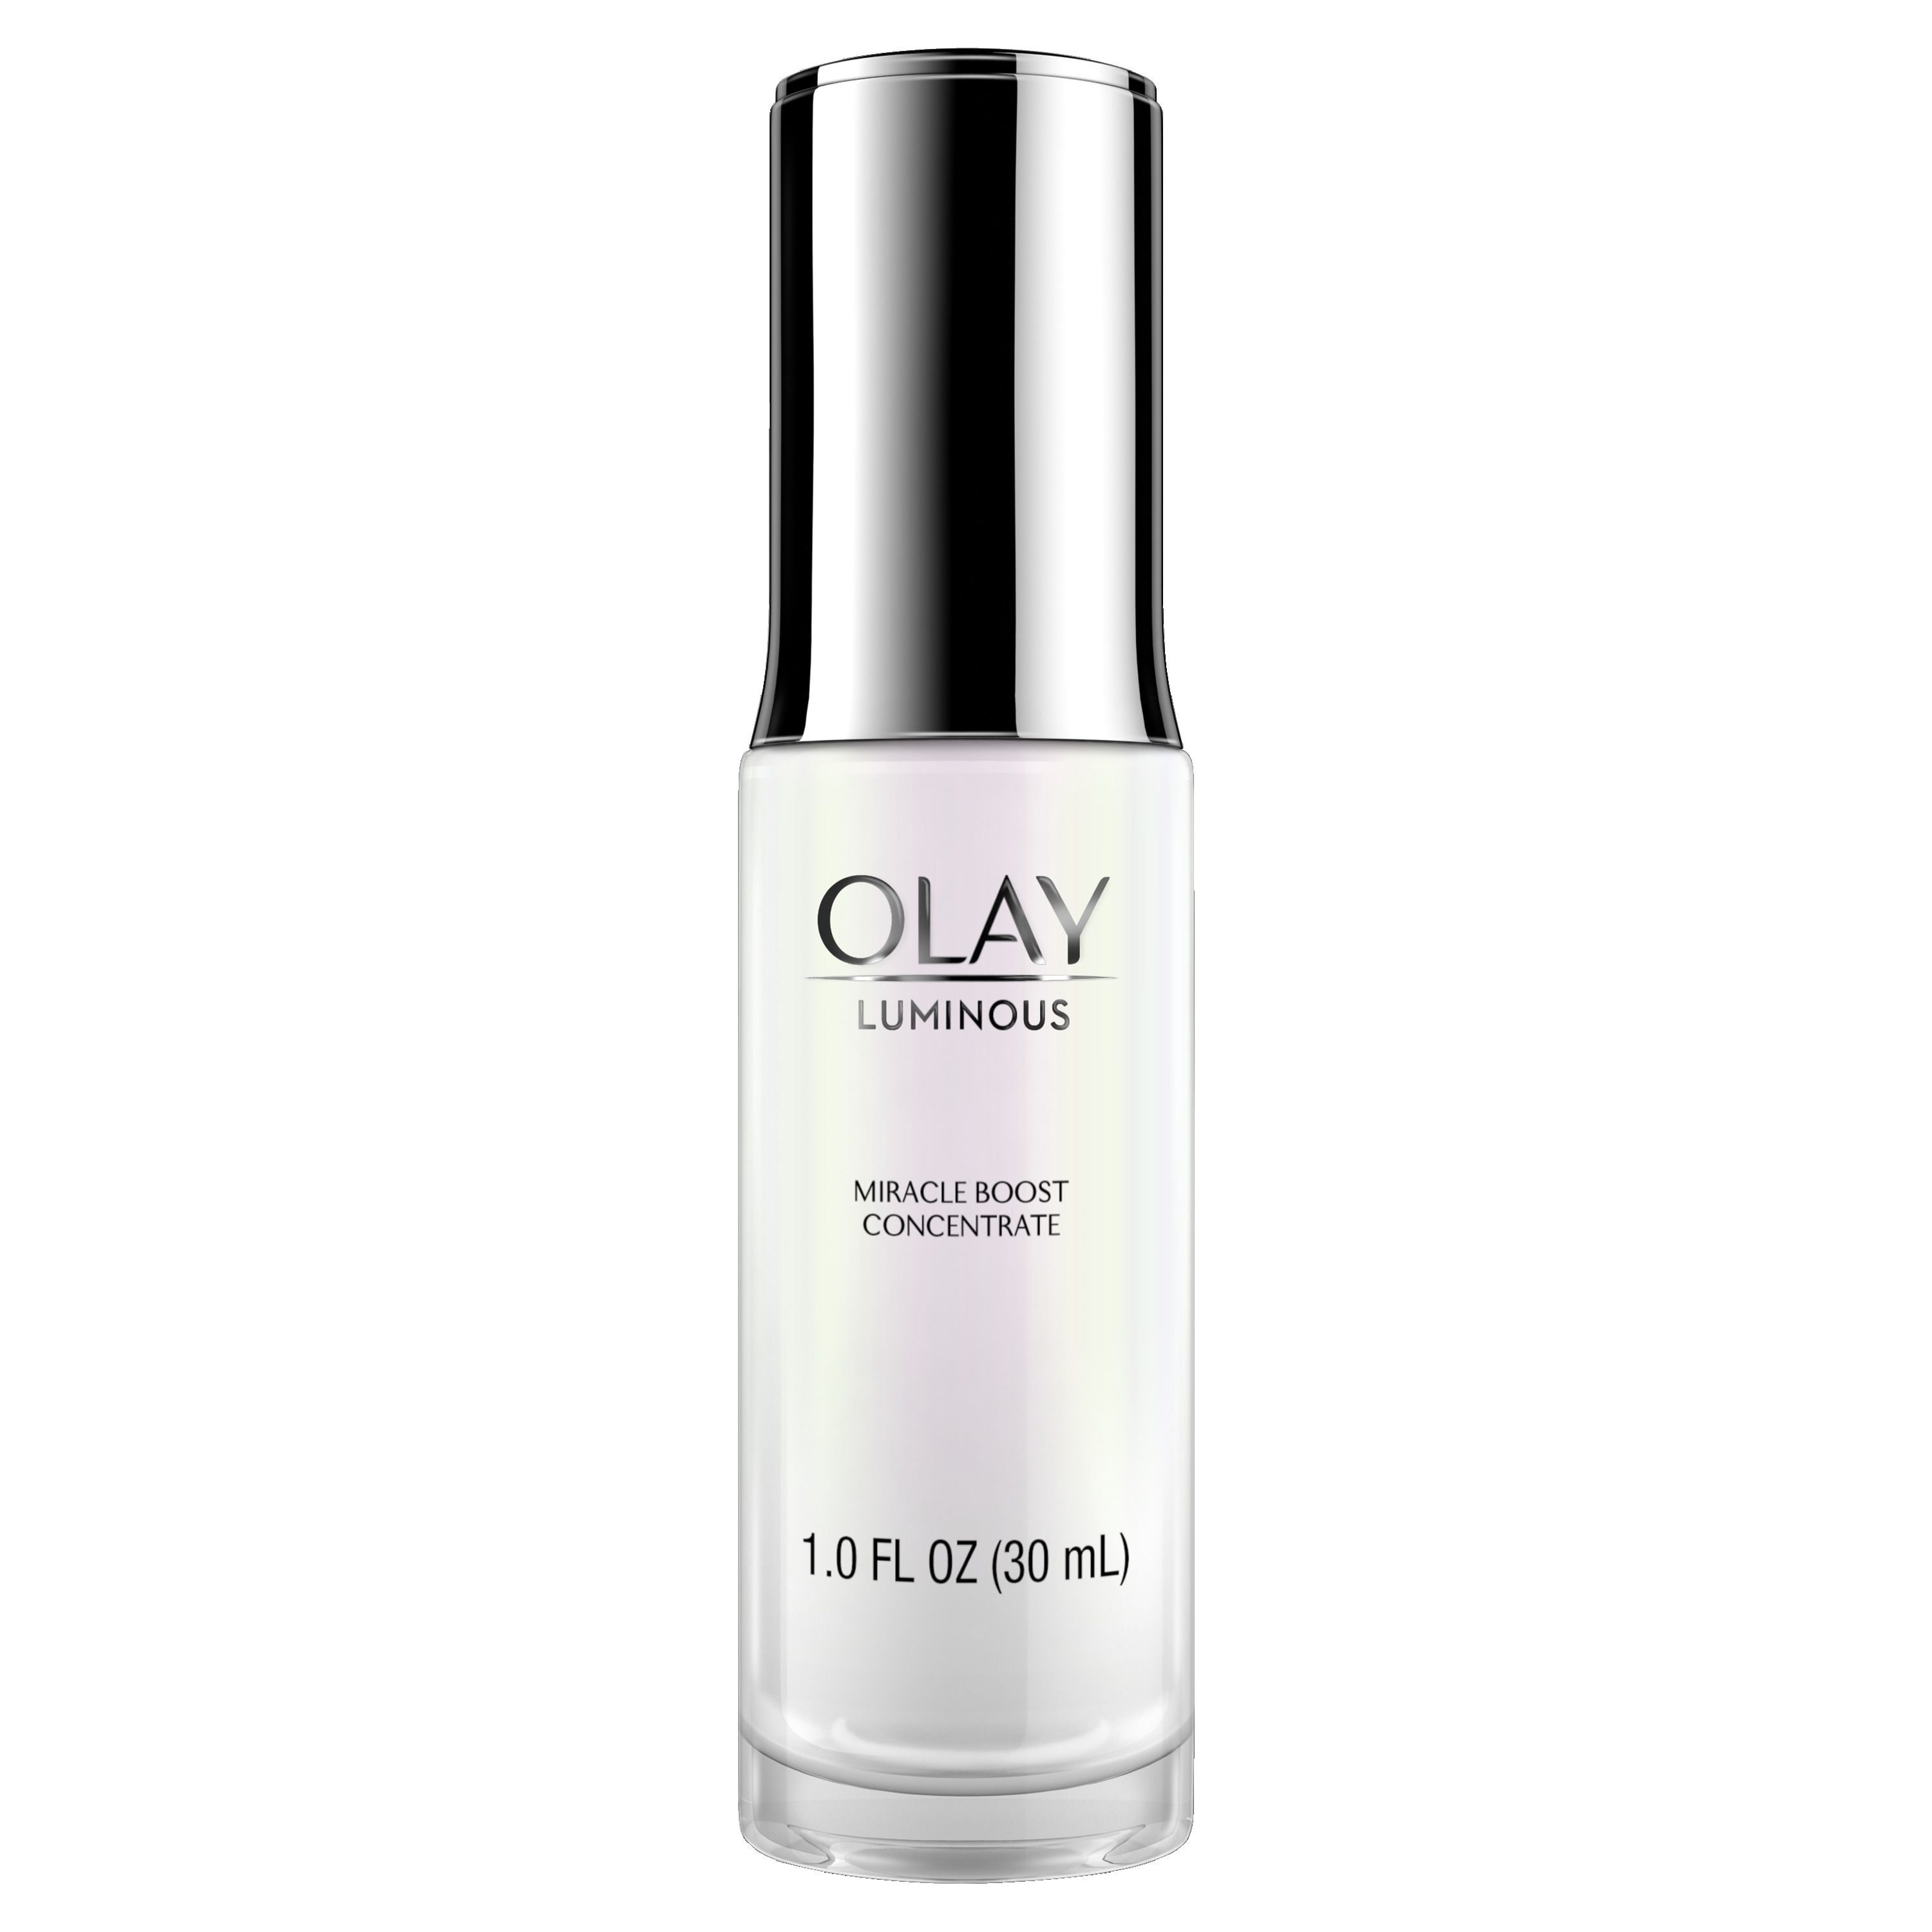 Olay Luminous Miracle Boost Concentrate, Face Booster 1.0 fl oz (30 ml)